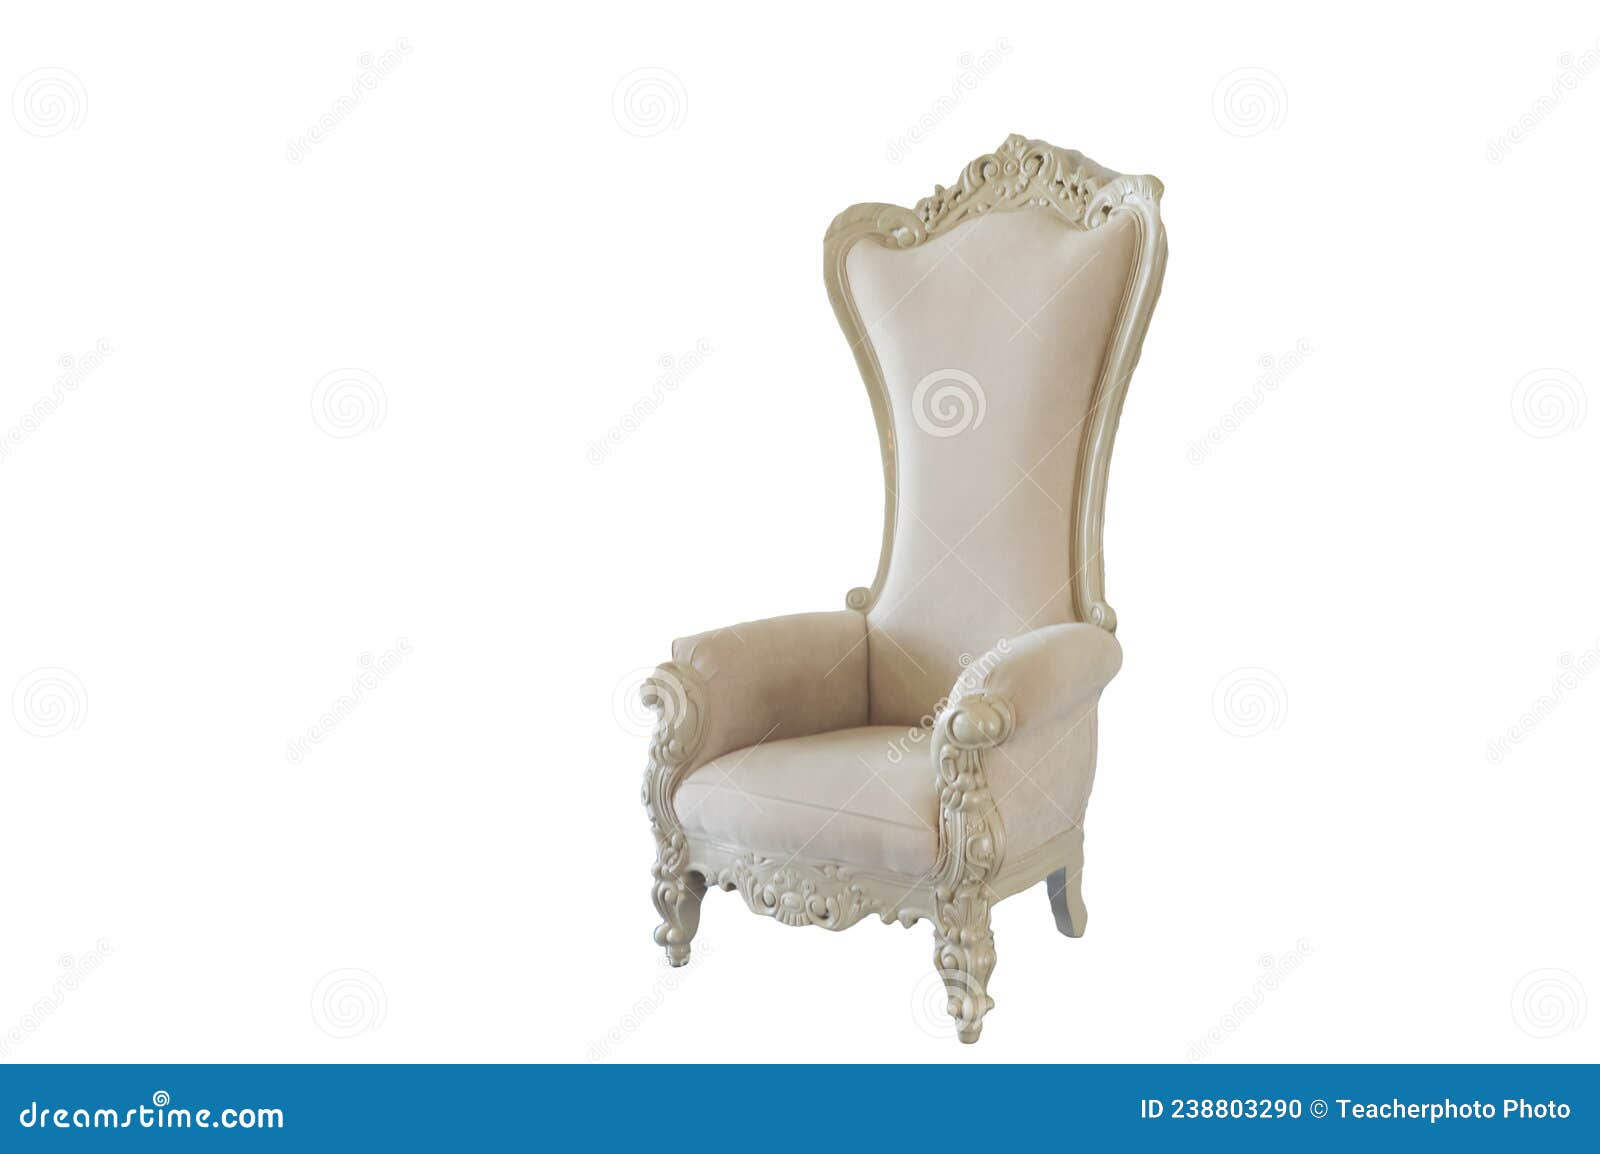 King Throne Chair Isolated on a White Background Stock Photo - Image of ...